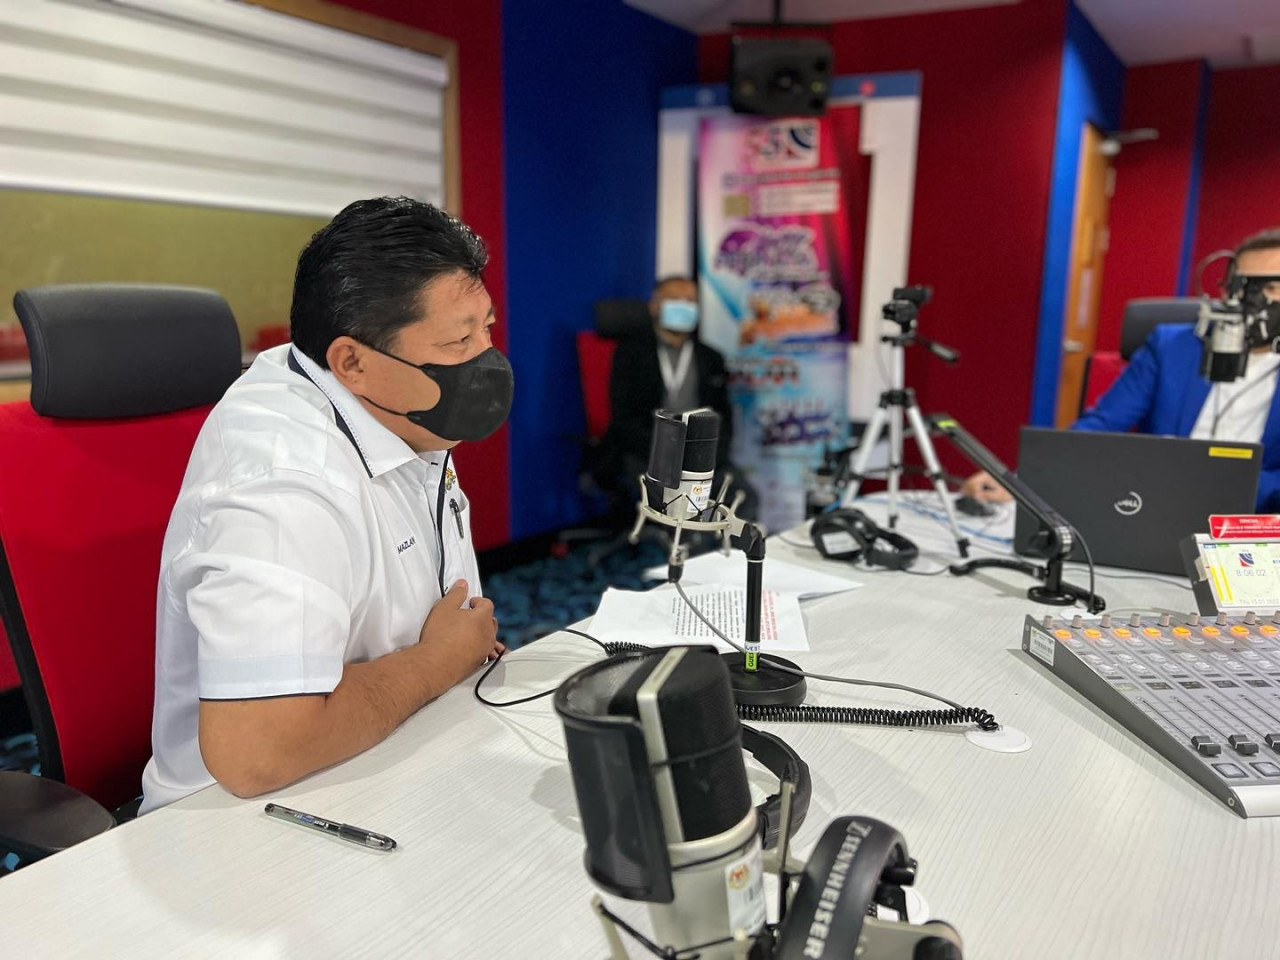 While he had previously dismissed suggestions of joining another party, former Johor Bersatu chief Mazlan Bujang (pic) is now tipped to join either Barisan Nasional or Warisan, the latter led by Datuk Seri Mohd Shafie Apdal, which had recently expanded its wings beyond Sabah and will be making its peninsular debut in the Johor polls. – Mazlan Bujang Facebook pic, February 18, 2022